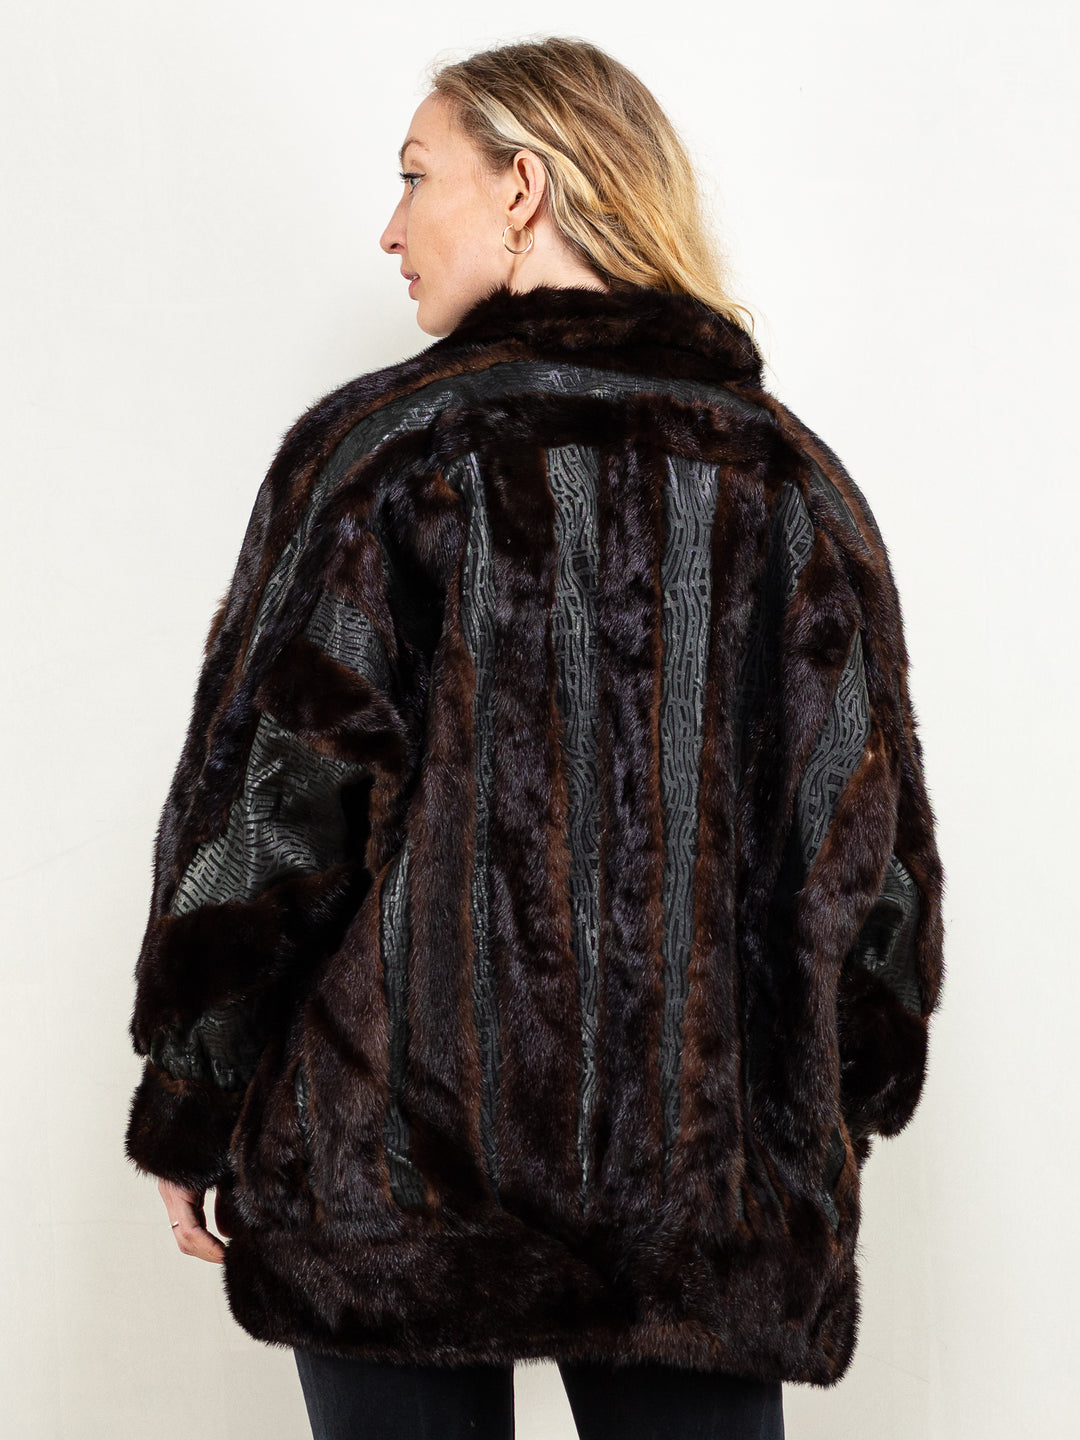 Fur and Leather Coat vintage 80's brown fur detail patterned leather short coat fancy luxurious opera coat sustainable size extra large XL